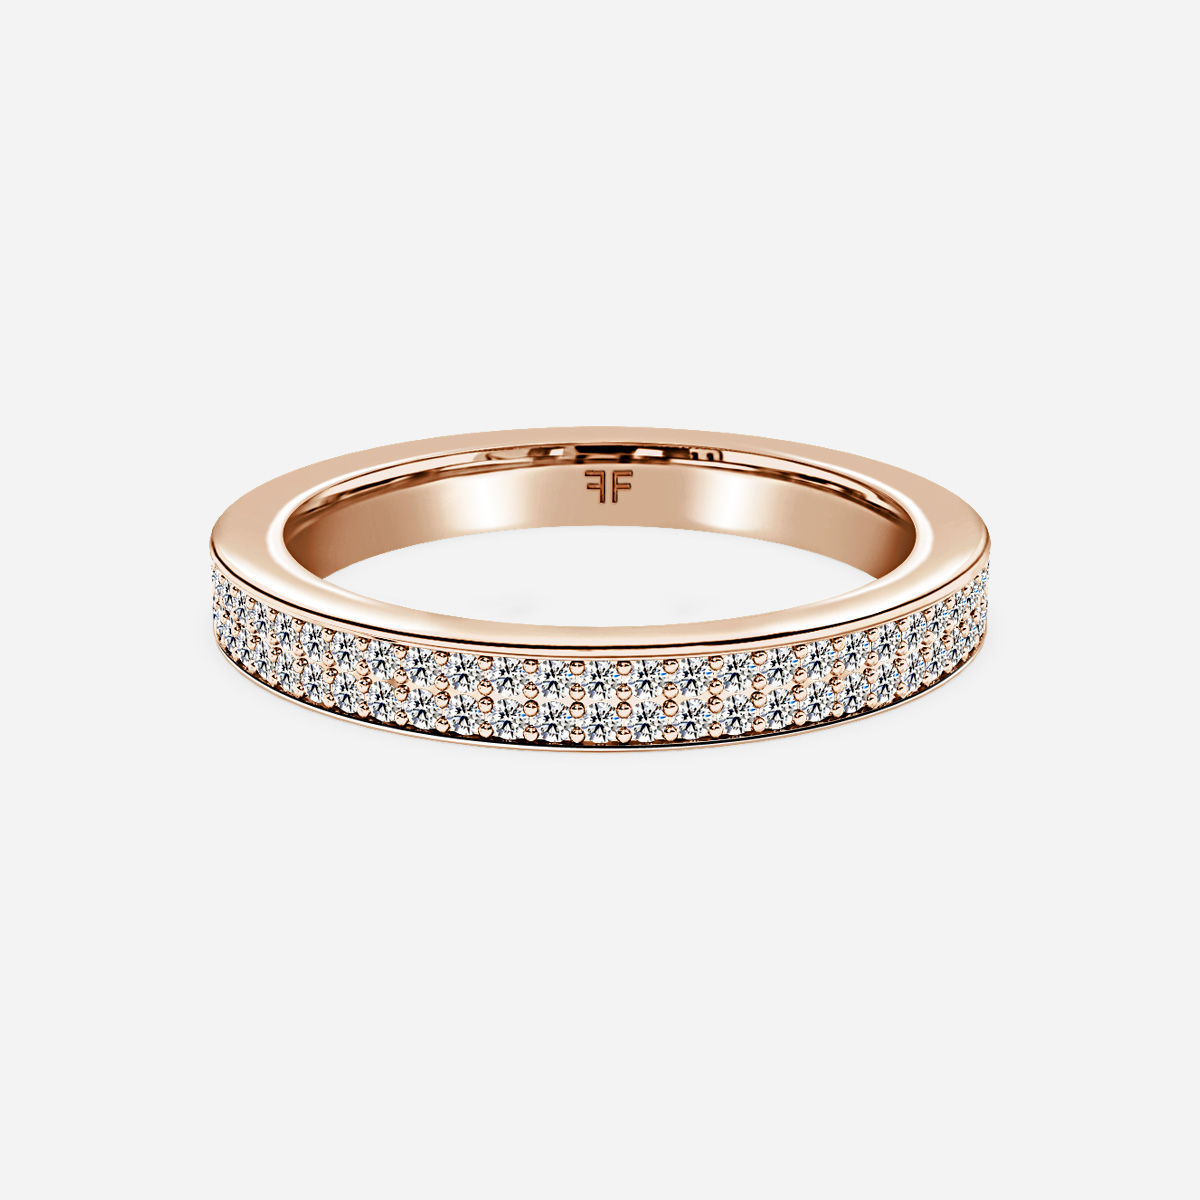 Ordines-Two Row Rose Gold Diamond Eternity Band